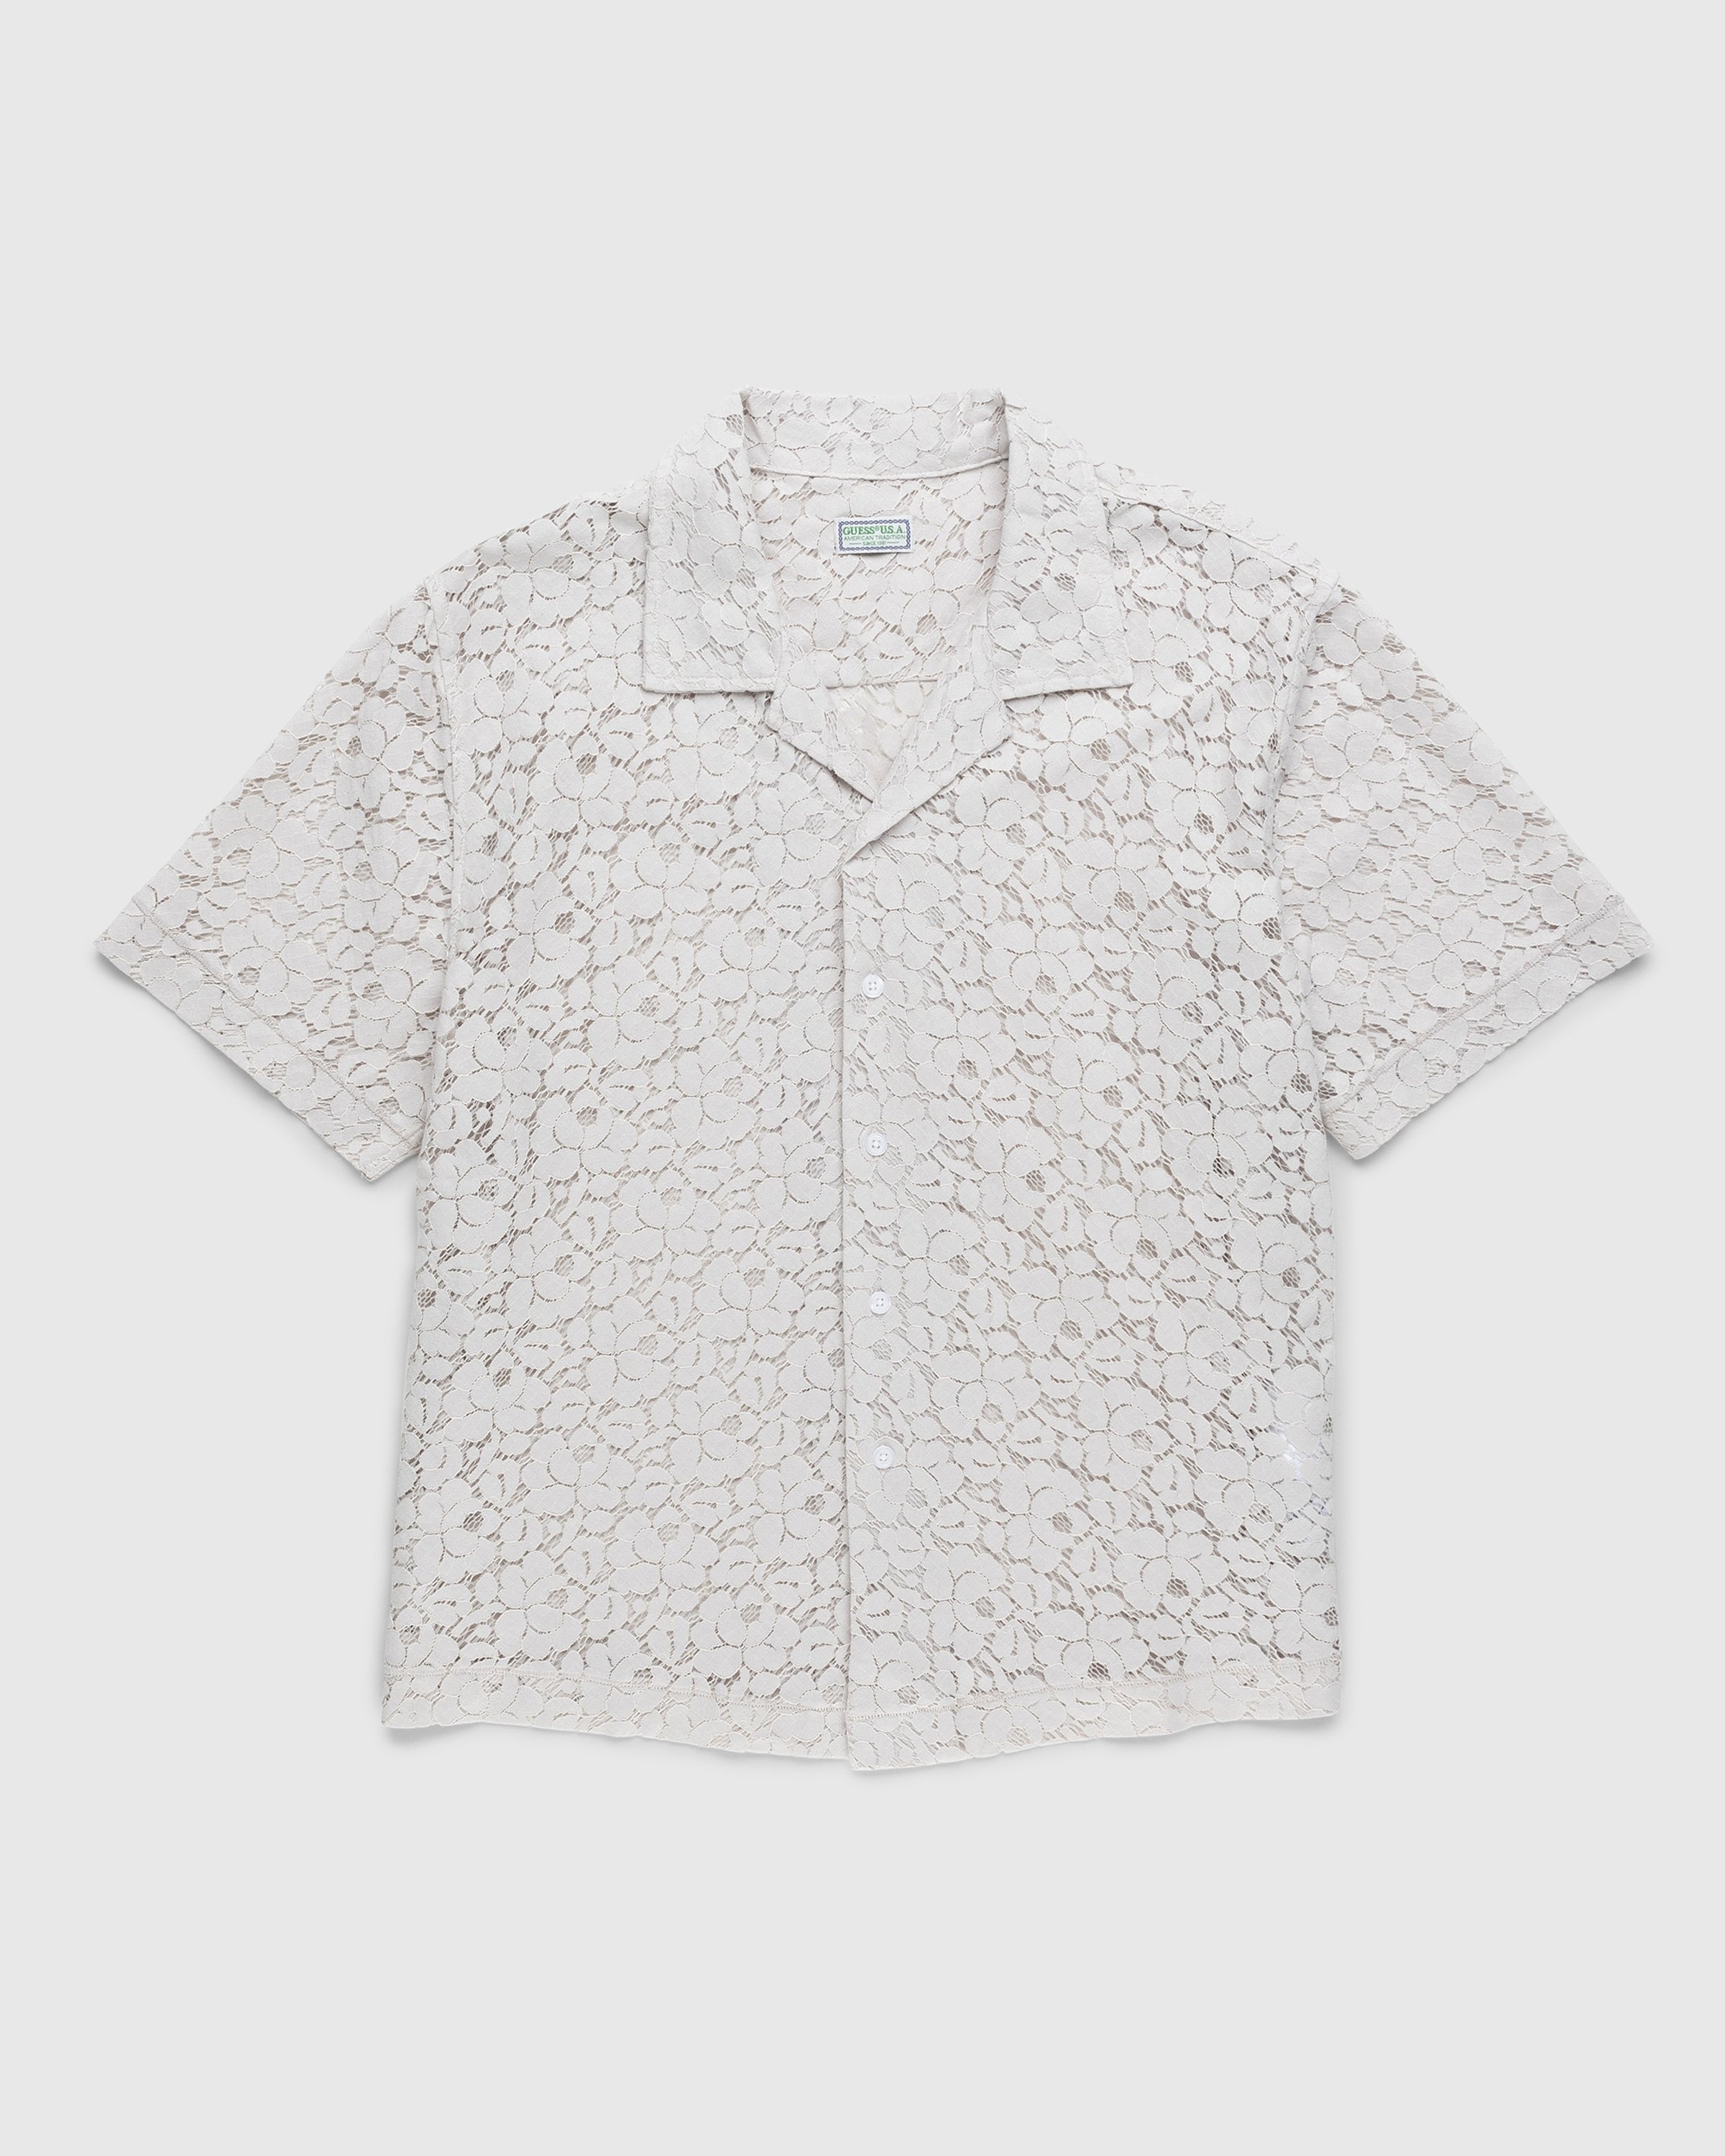 Guess Highsnobiety Camp | – Shirt Off White USA Shop Lace